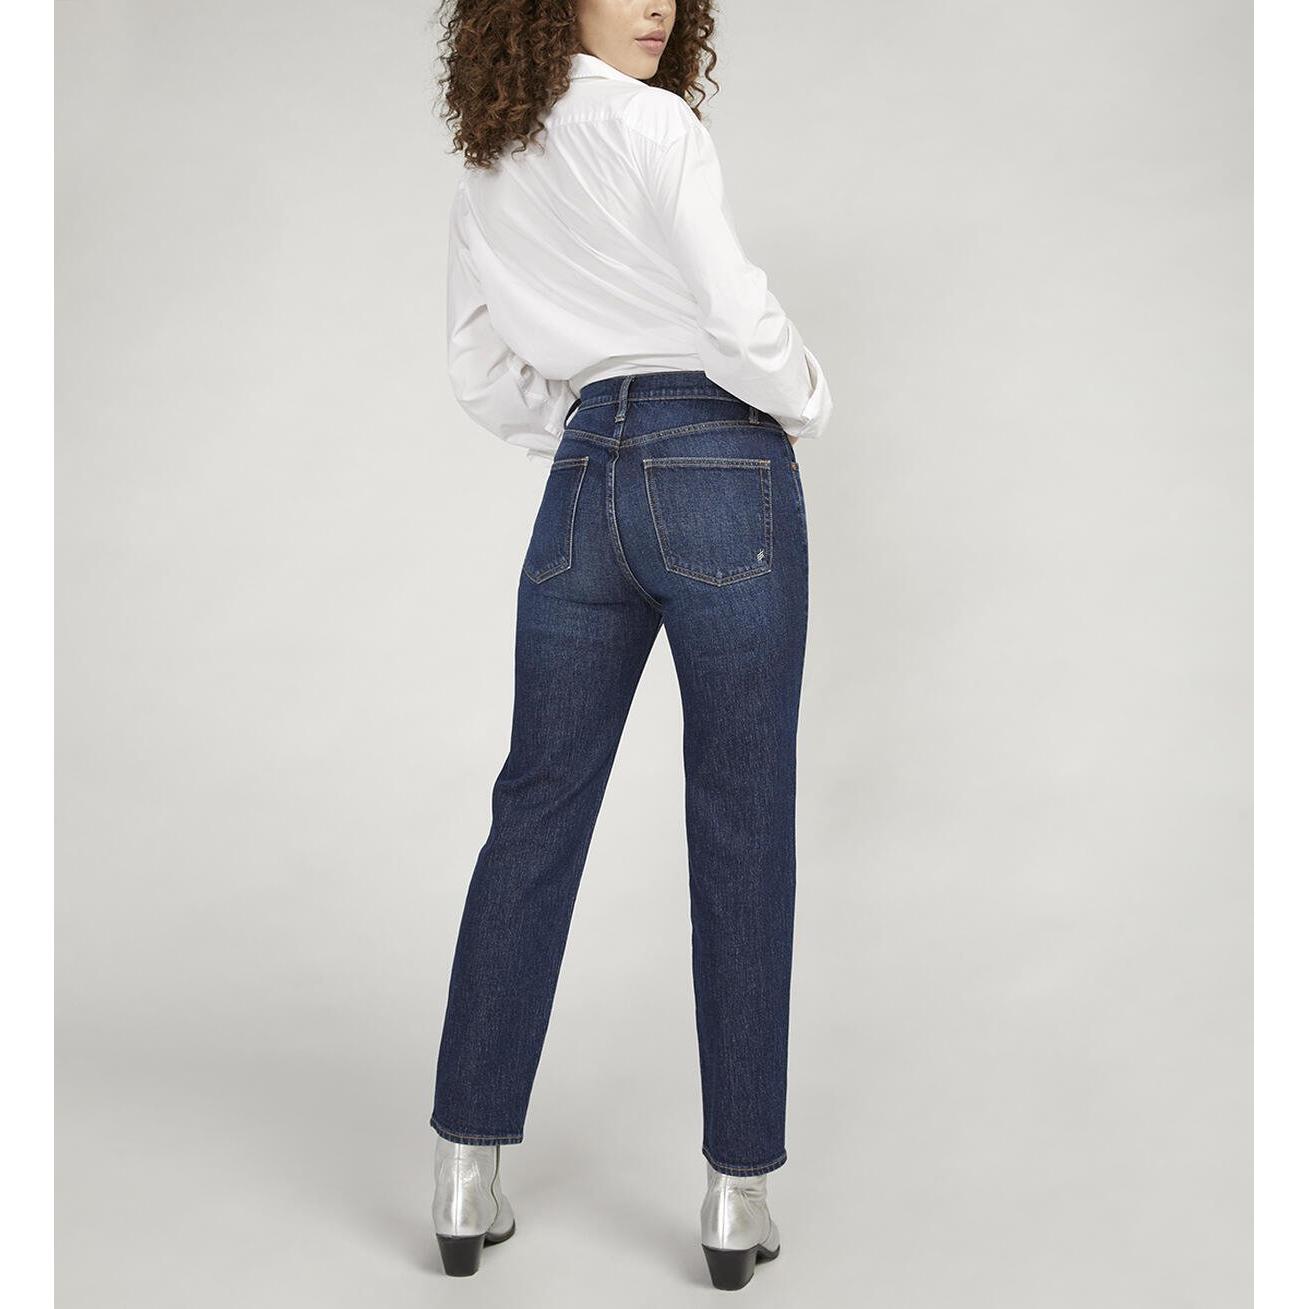 Silver Jeans - Highly Desirable Slim Straight in L28440RCS340-SQ3656029